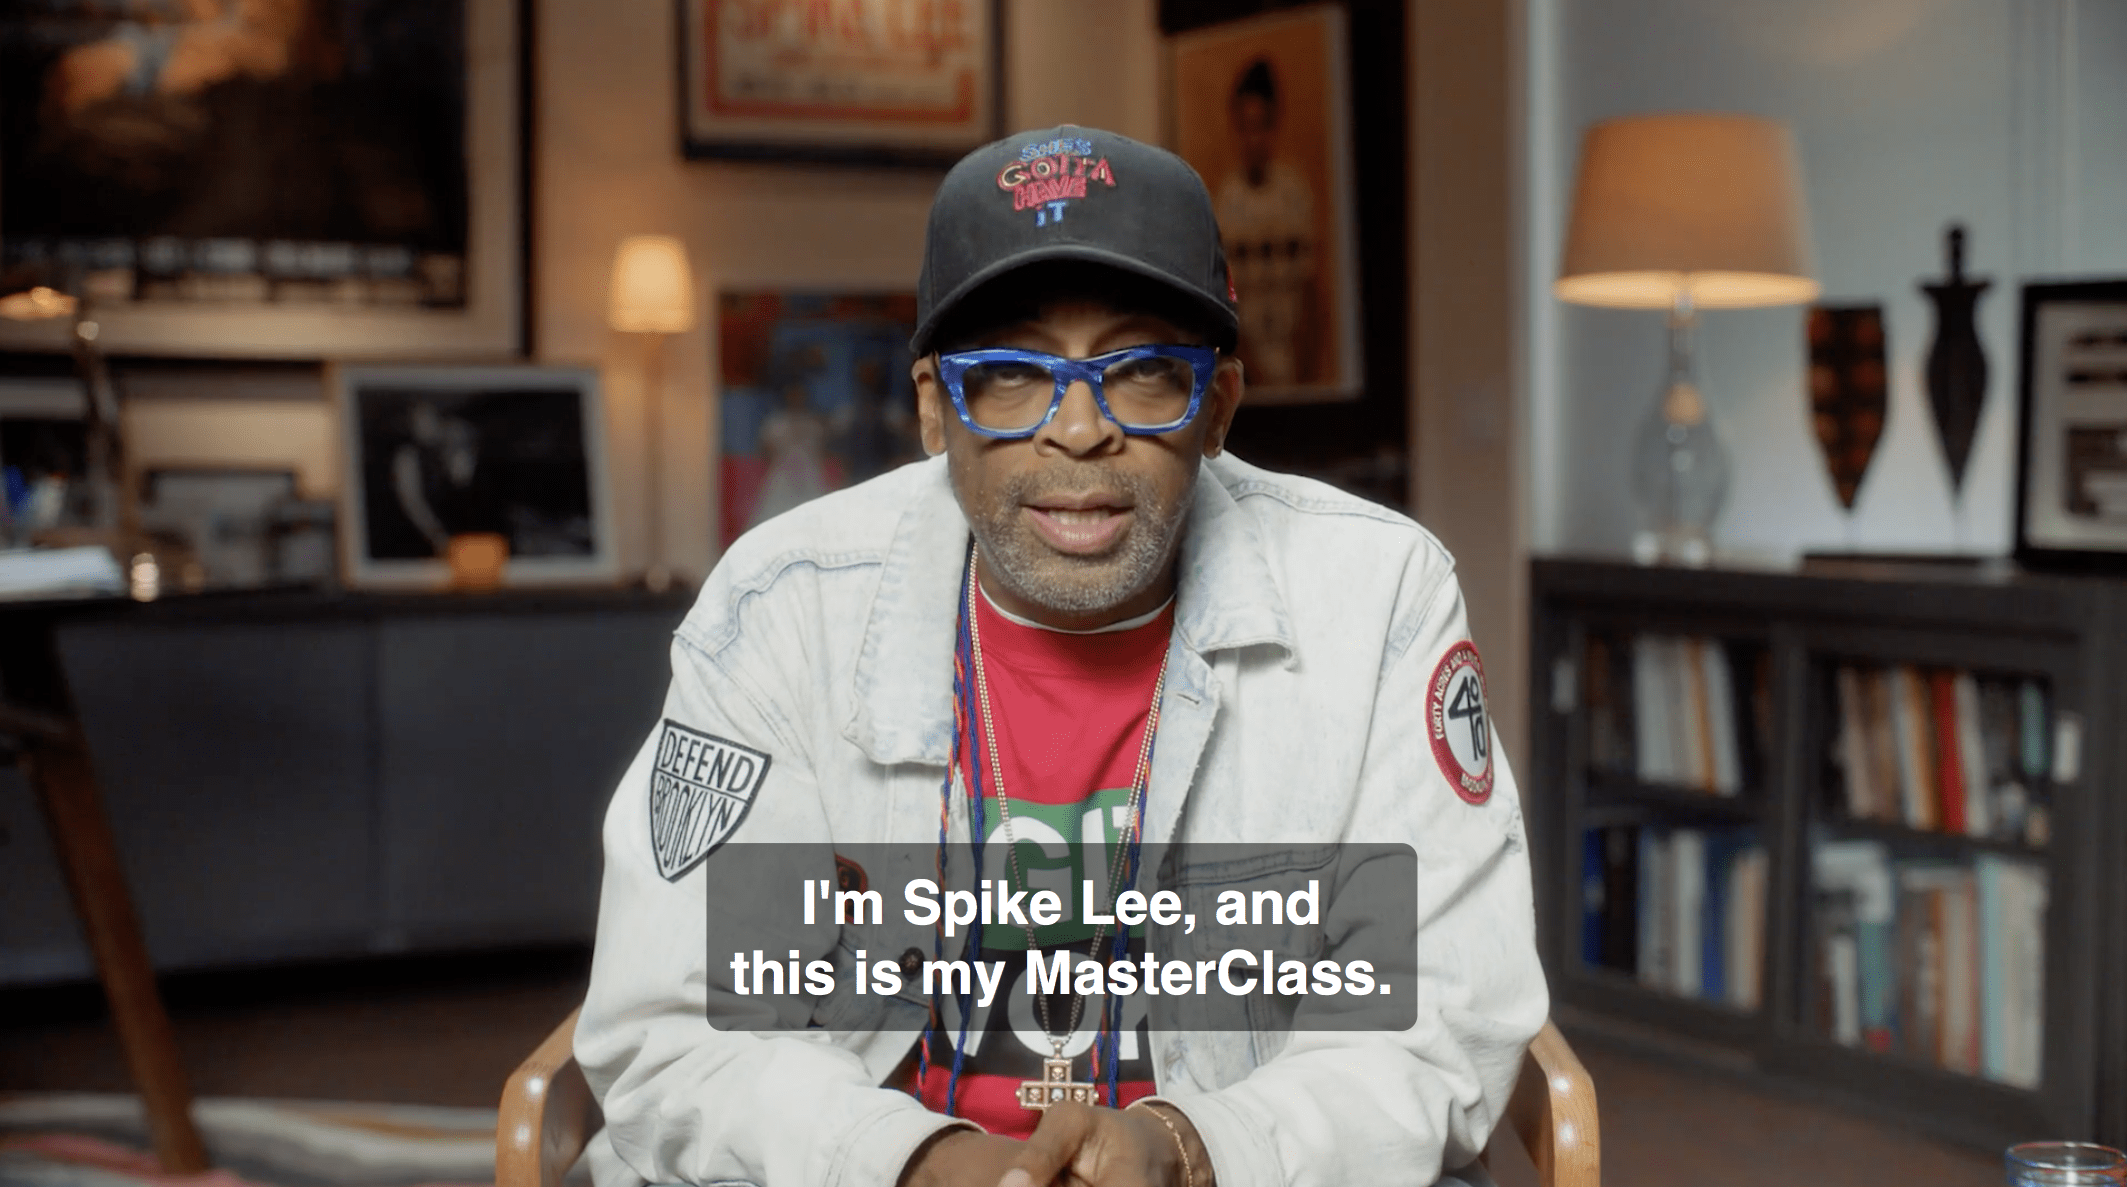 Spike Lee Masterclass Review- Film-making